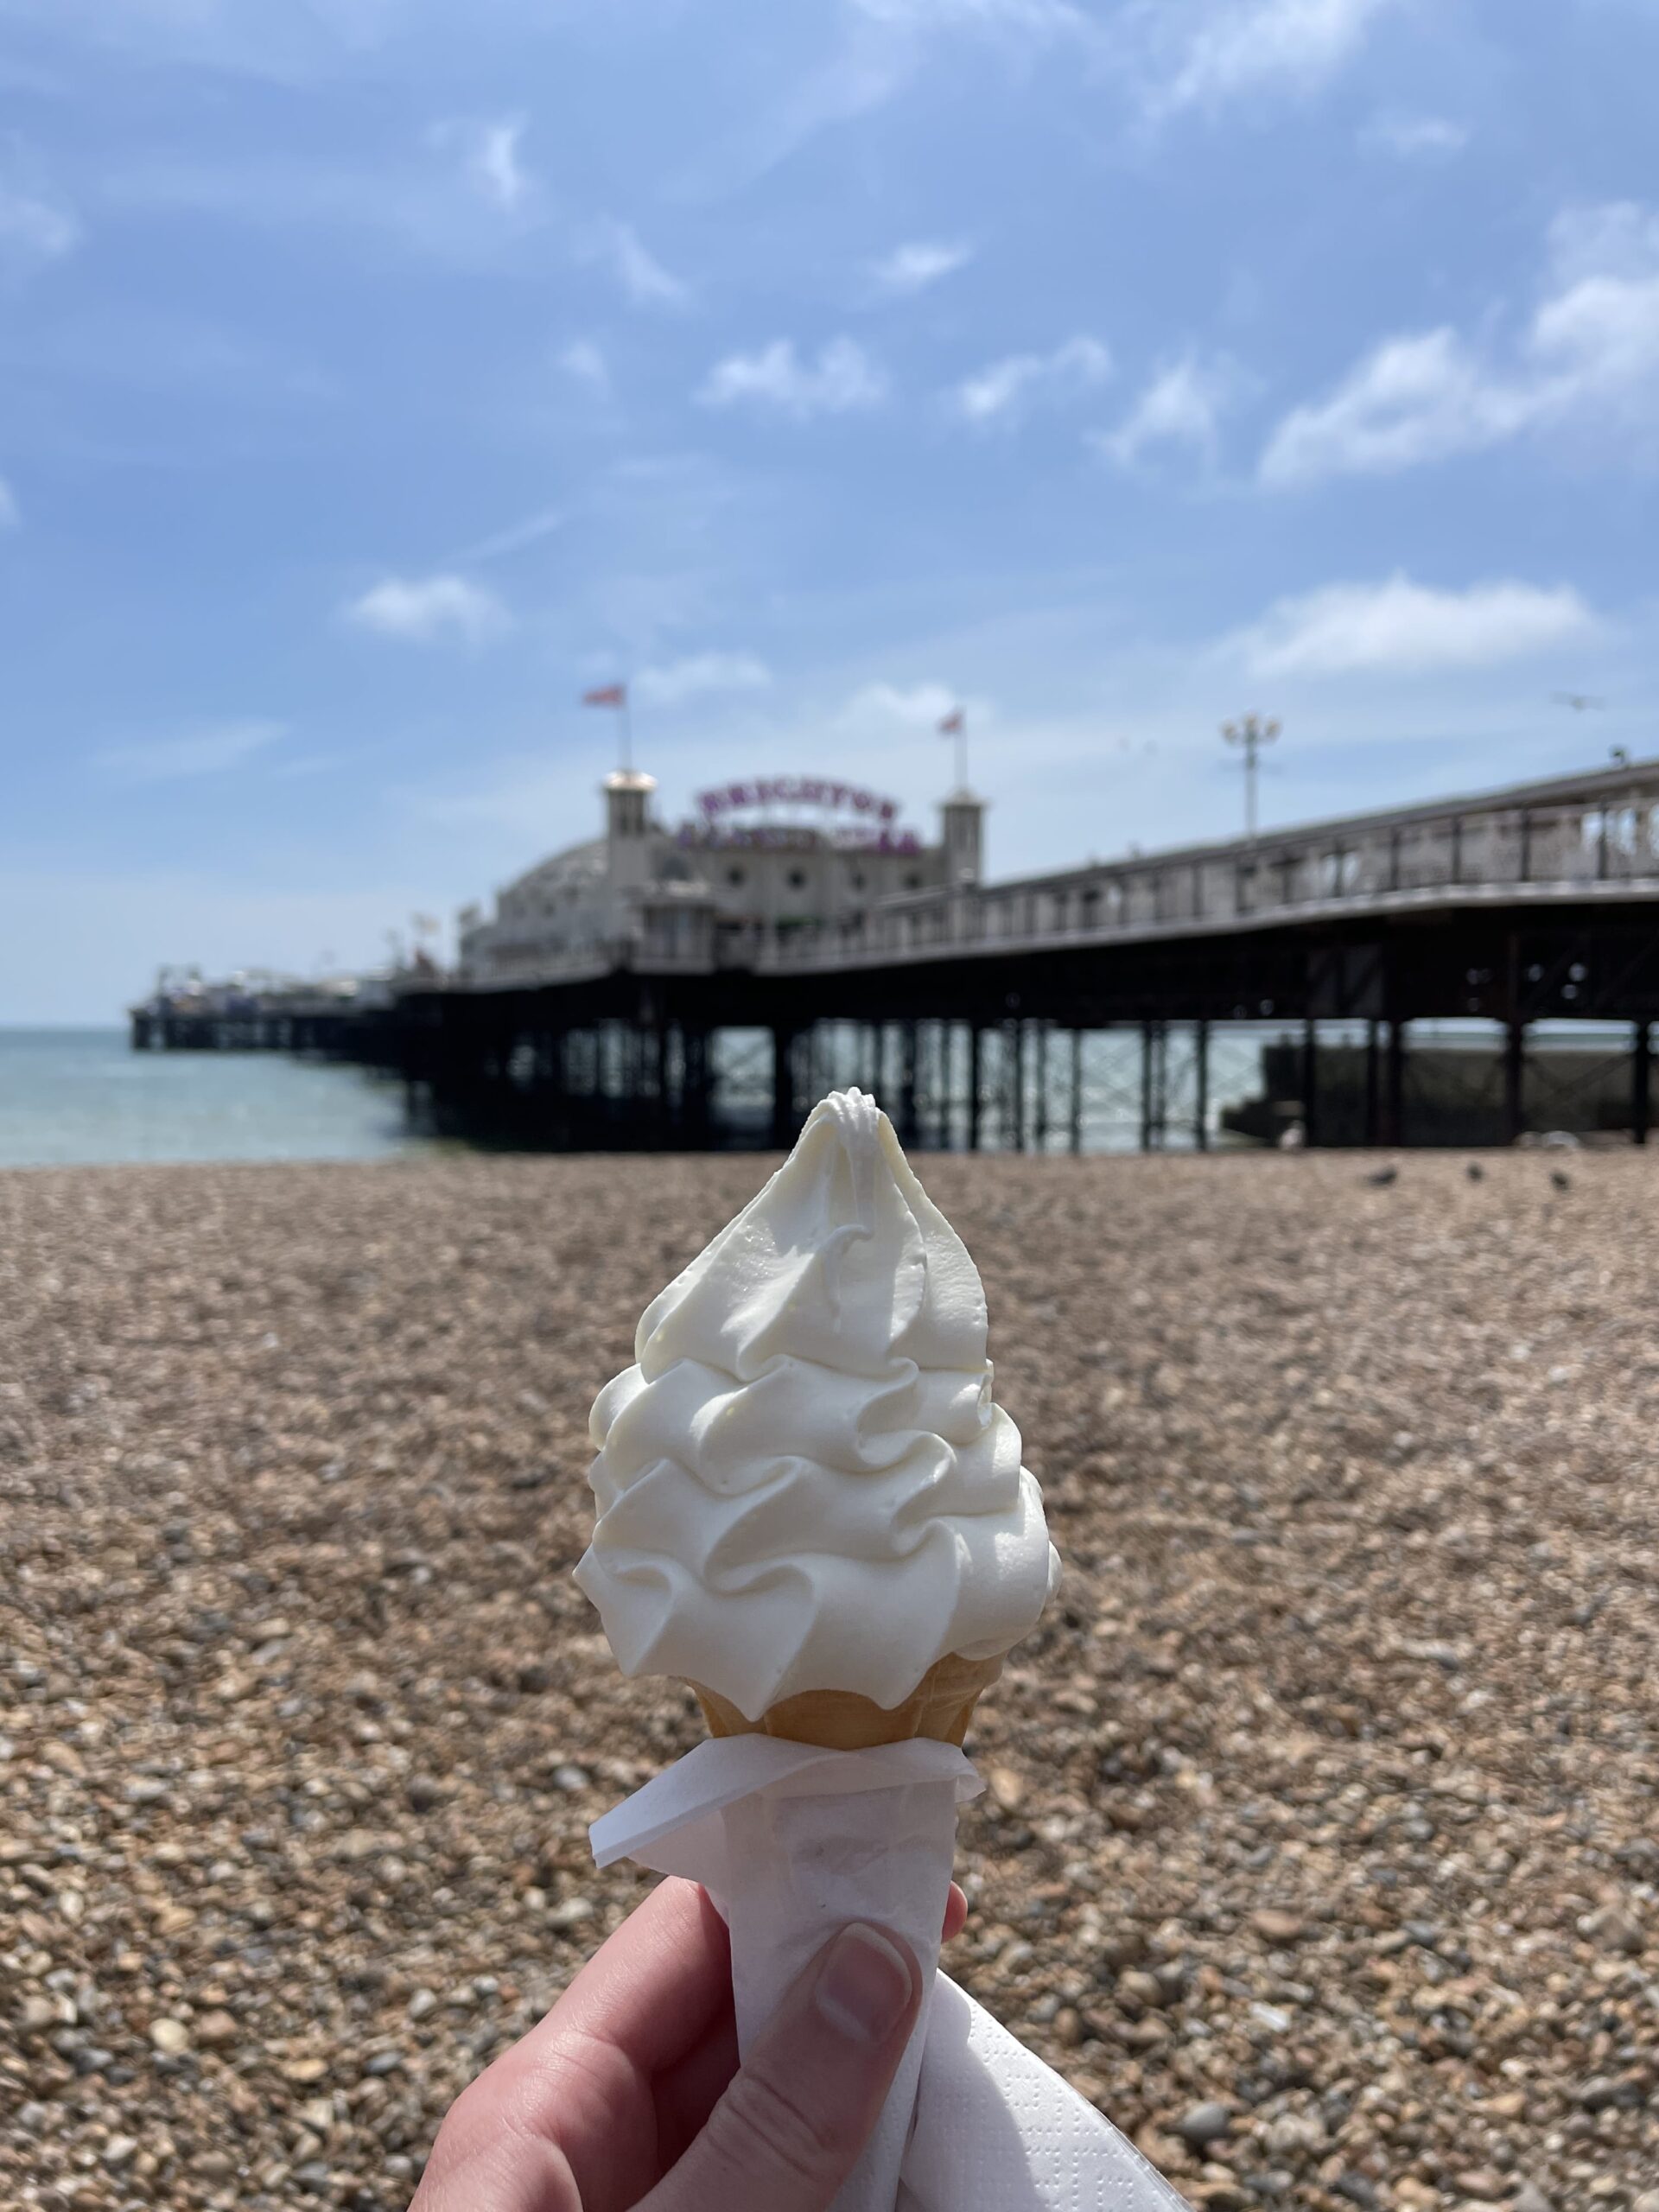 soft serve ice cream brighton uk best solo day trip from london things to see and do beachside vacation